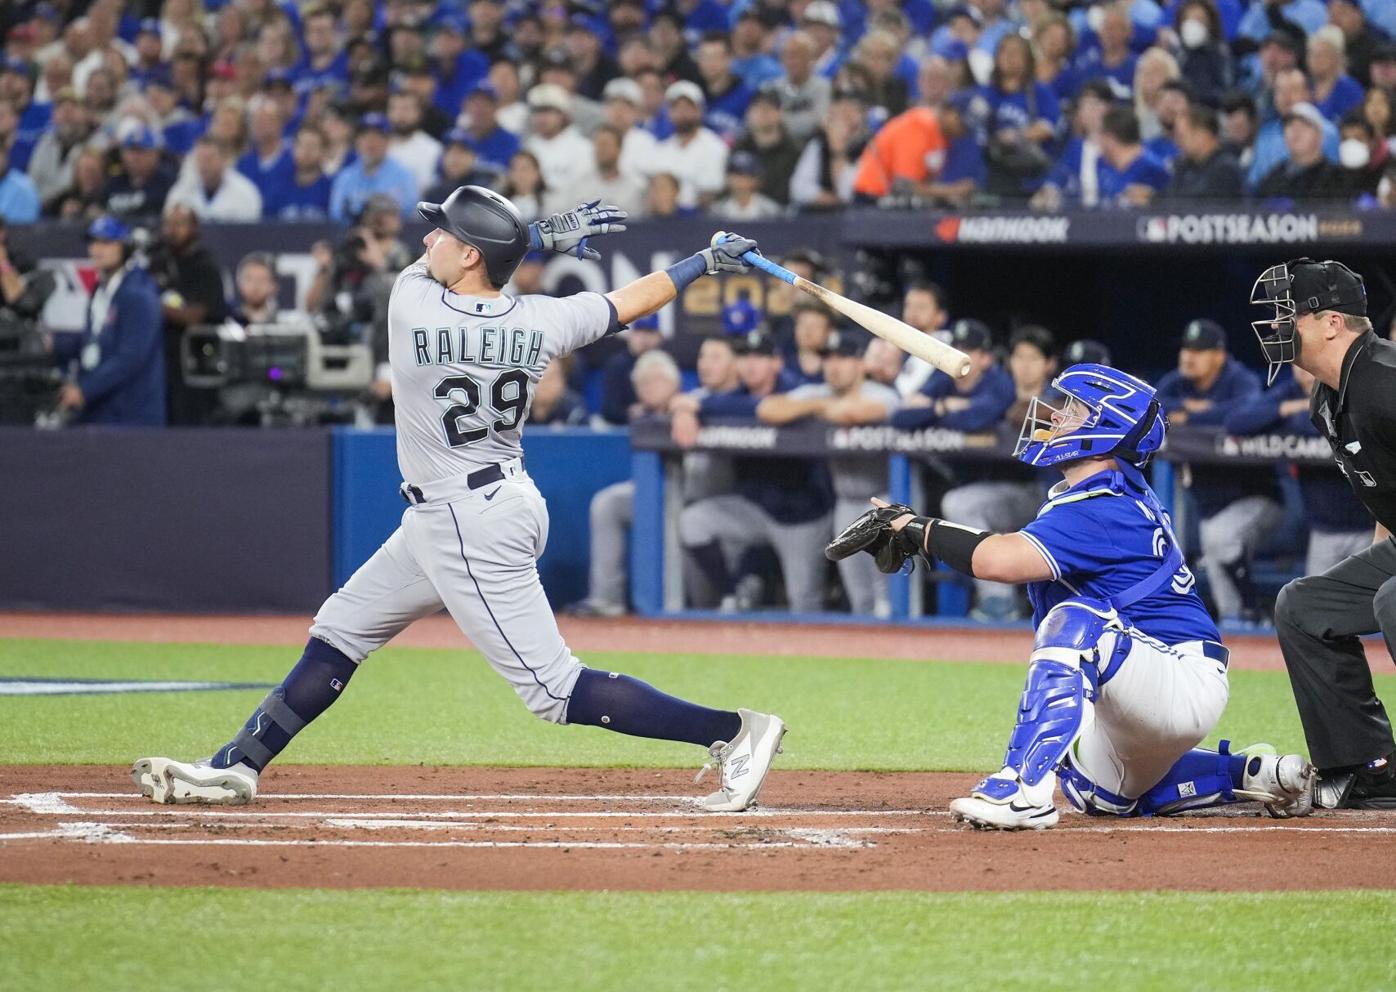 Blue Jays' George Springer leaves Game 2 vs. Mariners after scary collision